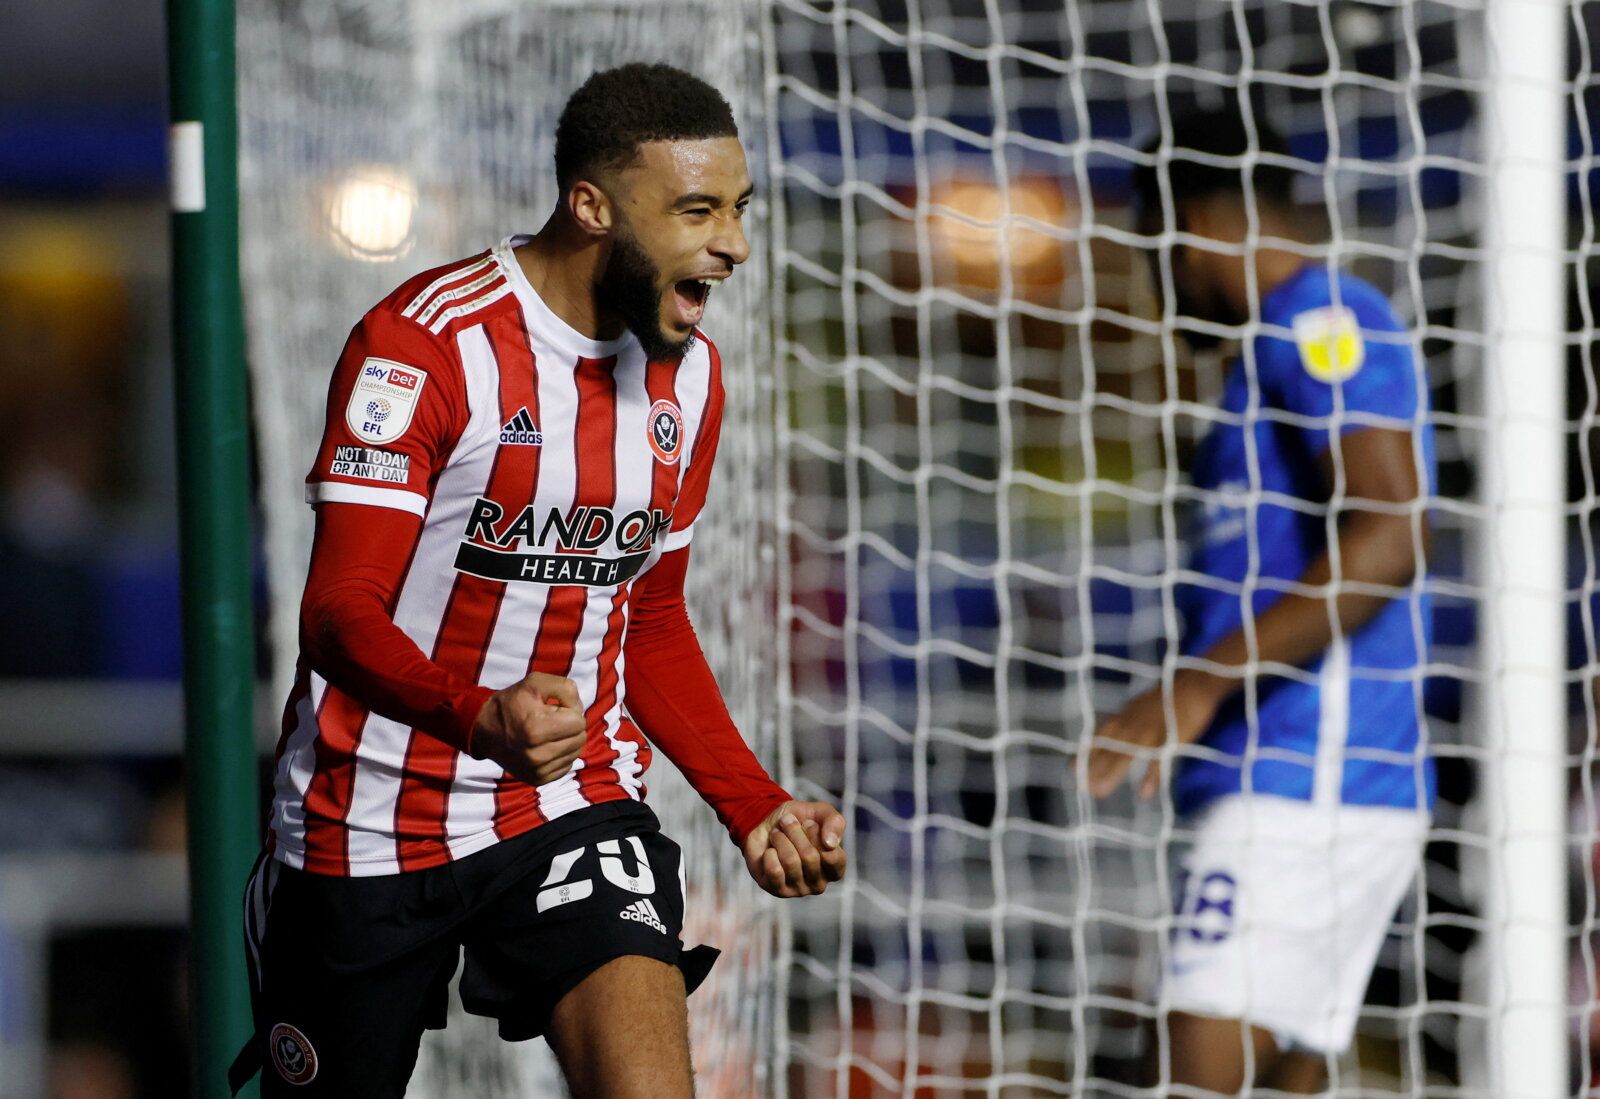 Soccer Football - Championship - Birmingham City v Sheffield United - St Andrew's, Birmingham, Britain - February 4, 2022 Sheffield United's Jayden Bogle celebrates scoring their second goal  Action Images/Jason Cairnduff  EDITORIAL USE ONLY. No use with unauthorized audio, video, data, fixture lists, club/league logos or 'live' services. Online in-match use limited to 75 images, no video emulation. No use in betting, games or single club /league/player publications. Please contact your account 